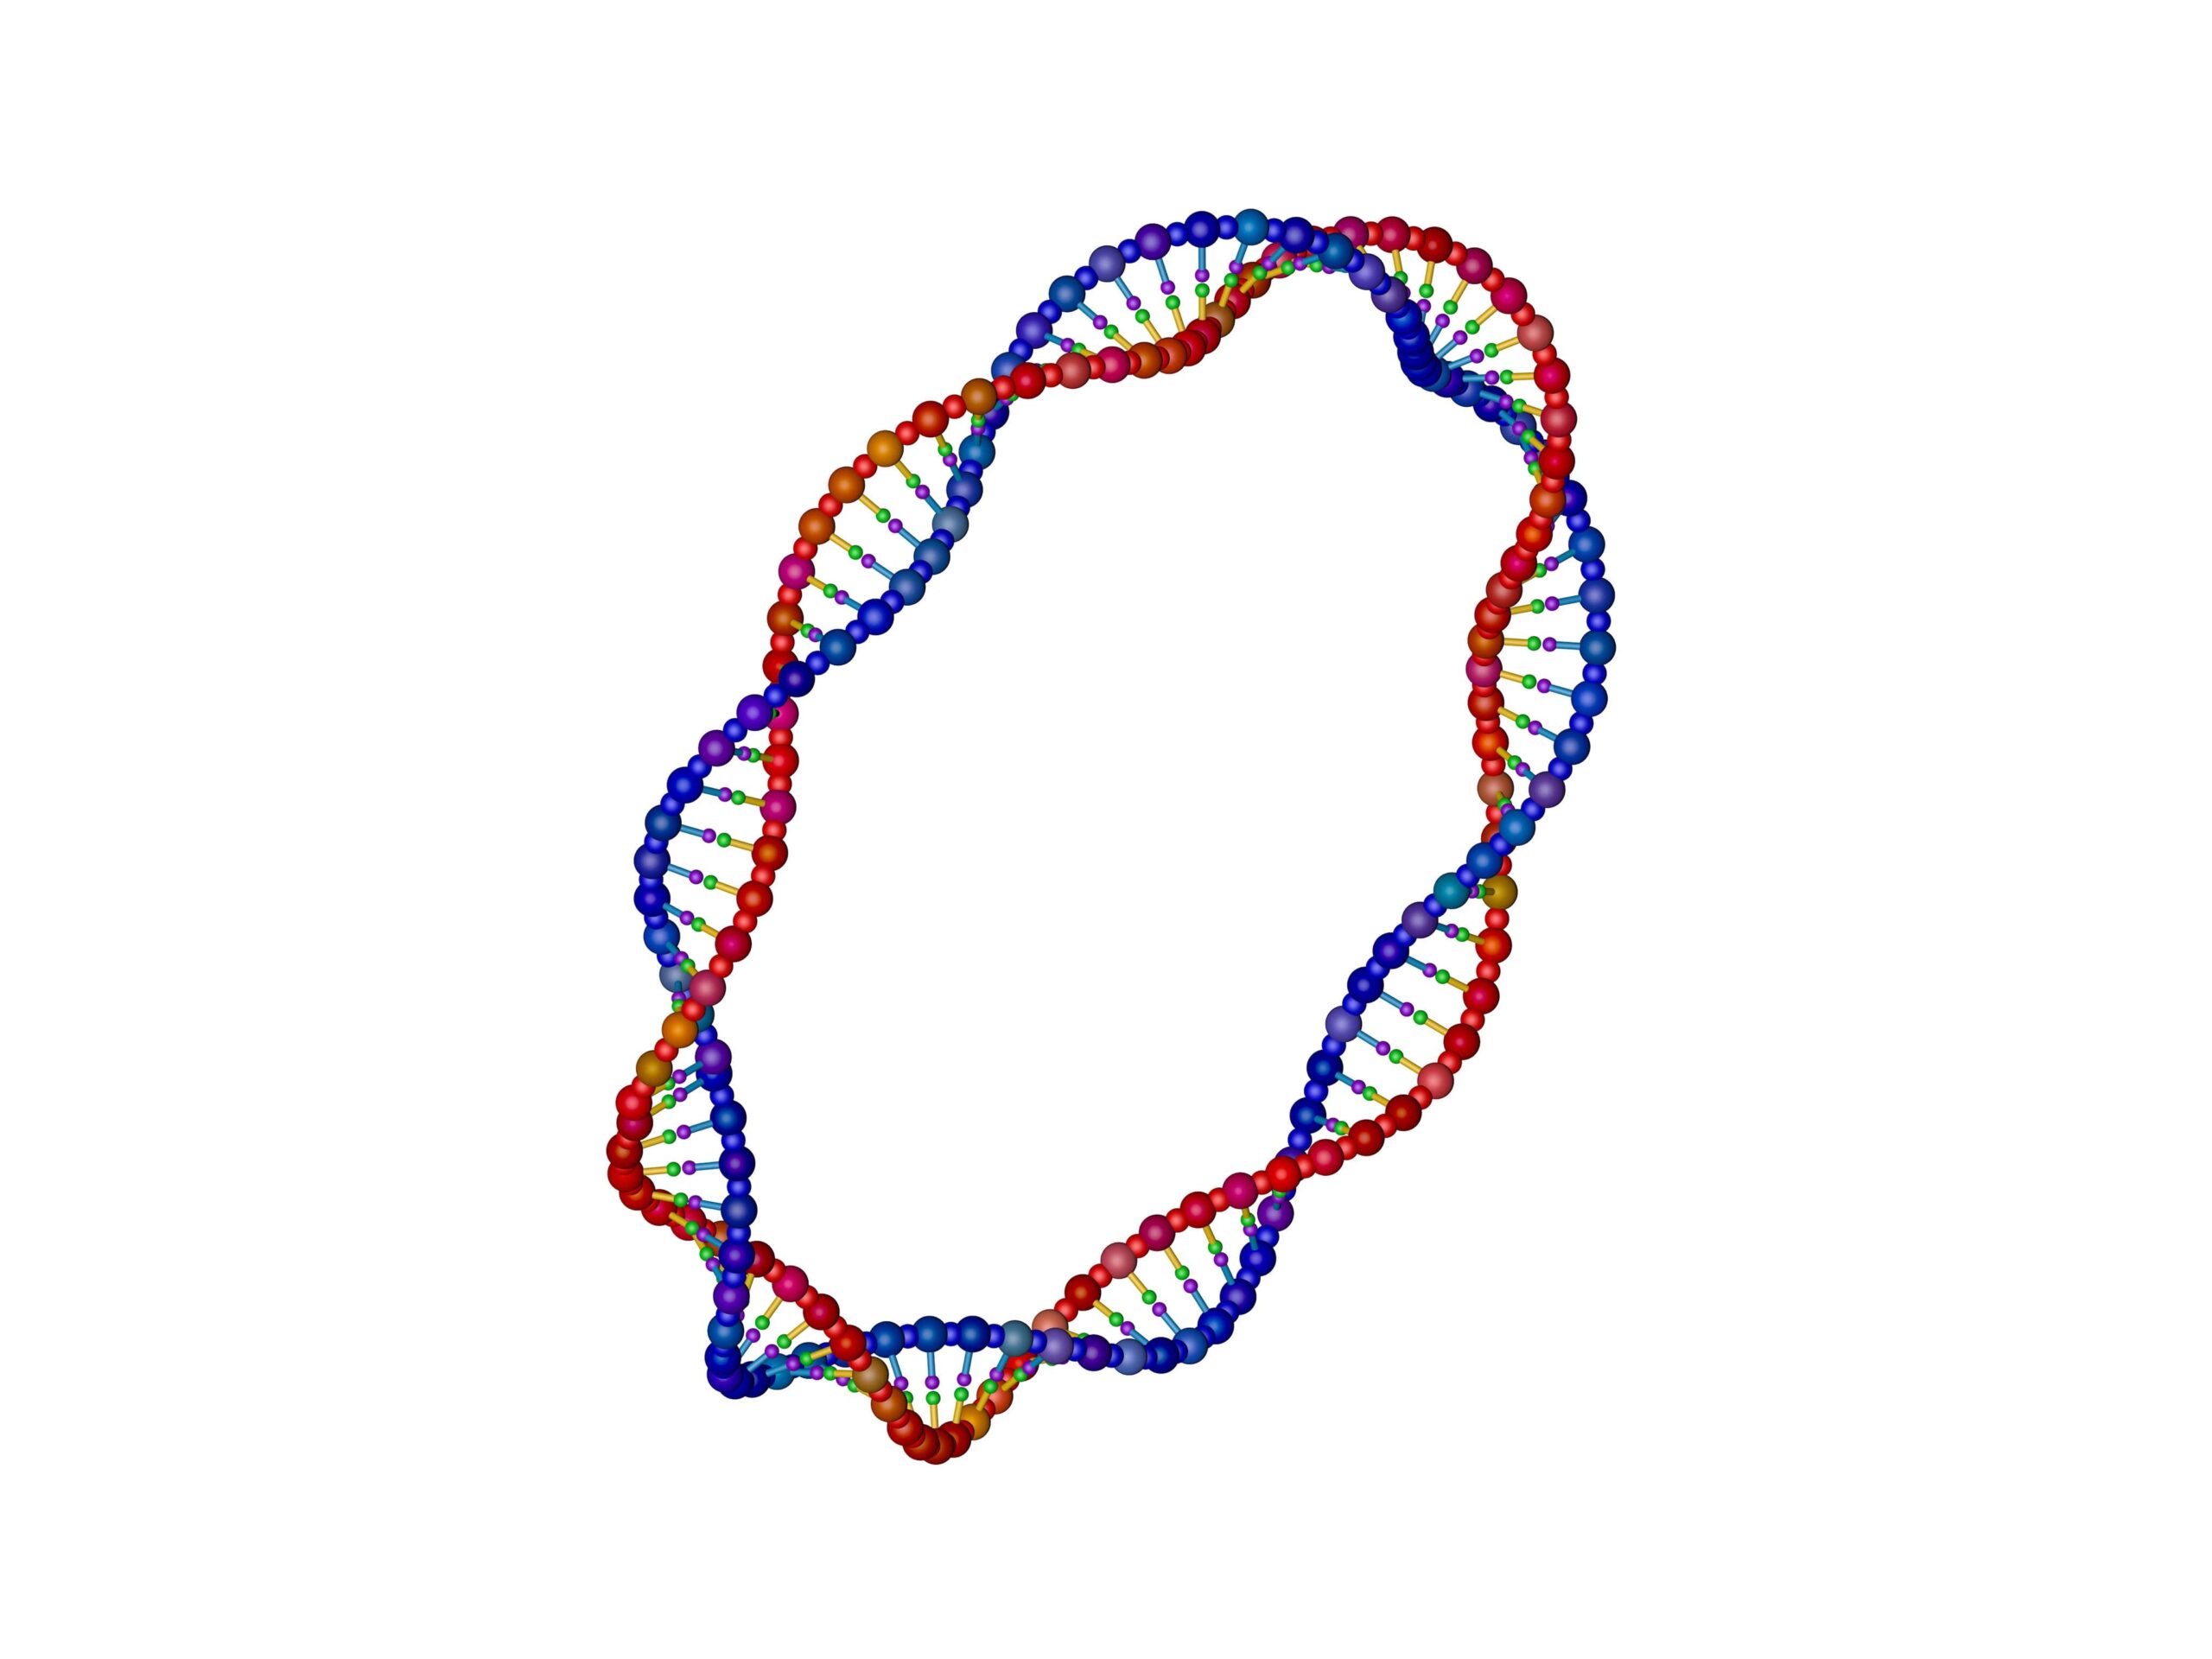 DNA strand in the form of a circle